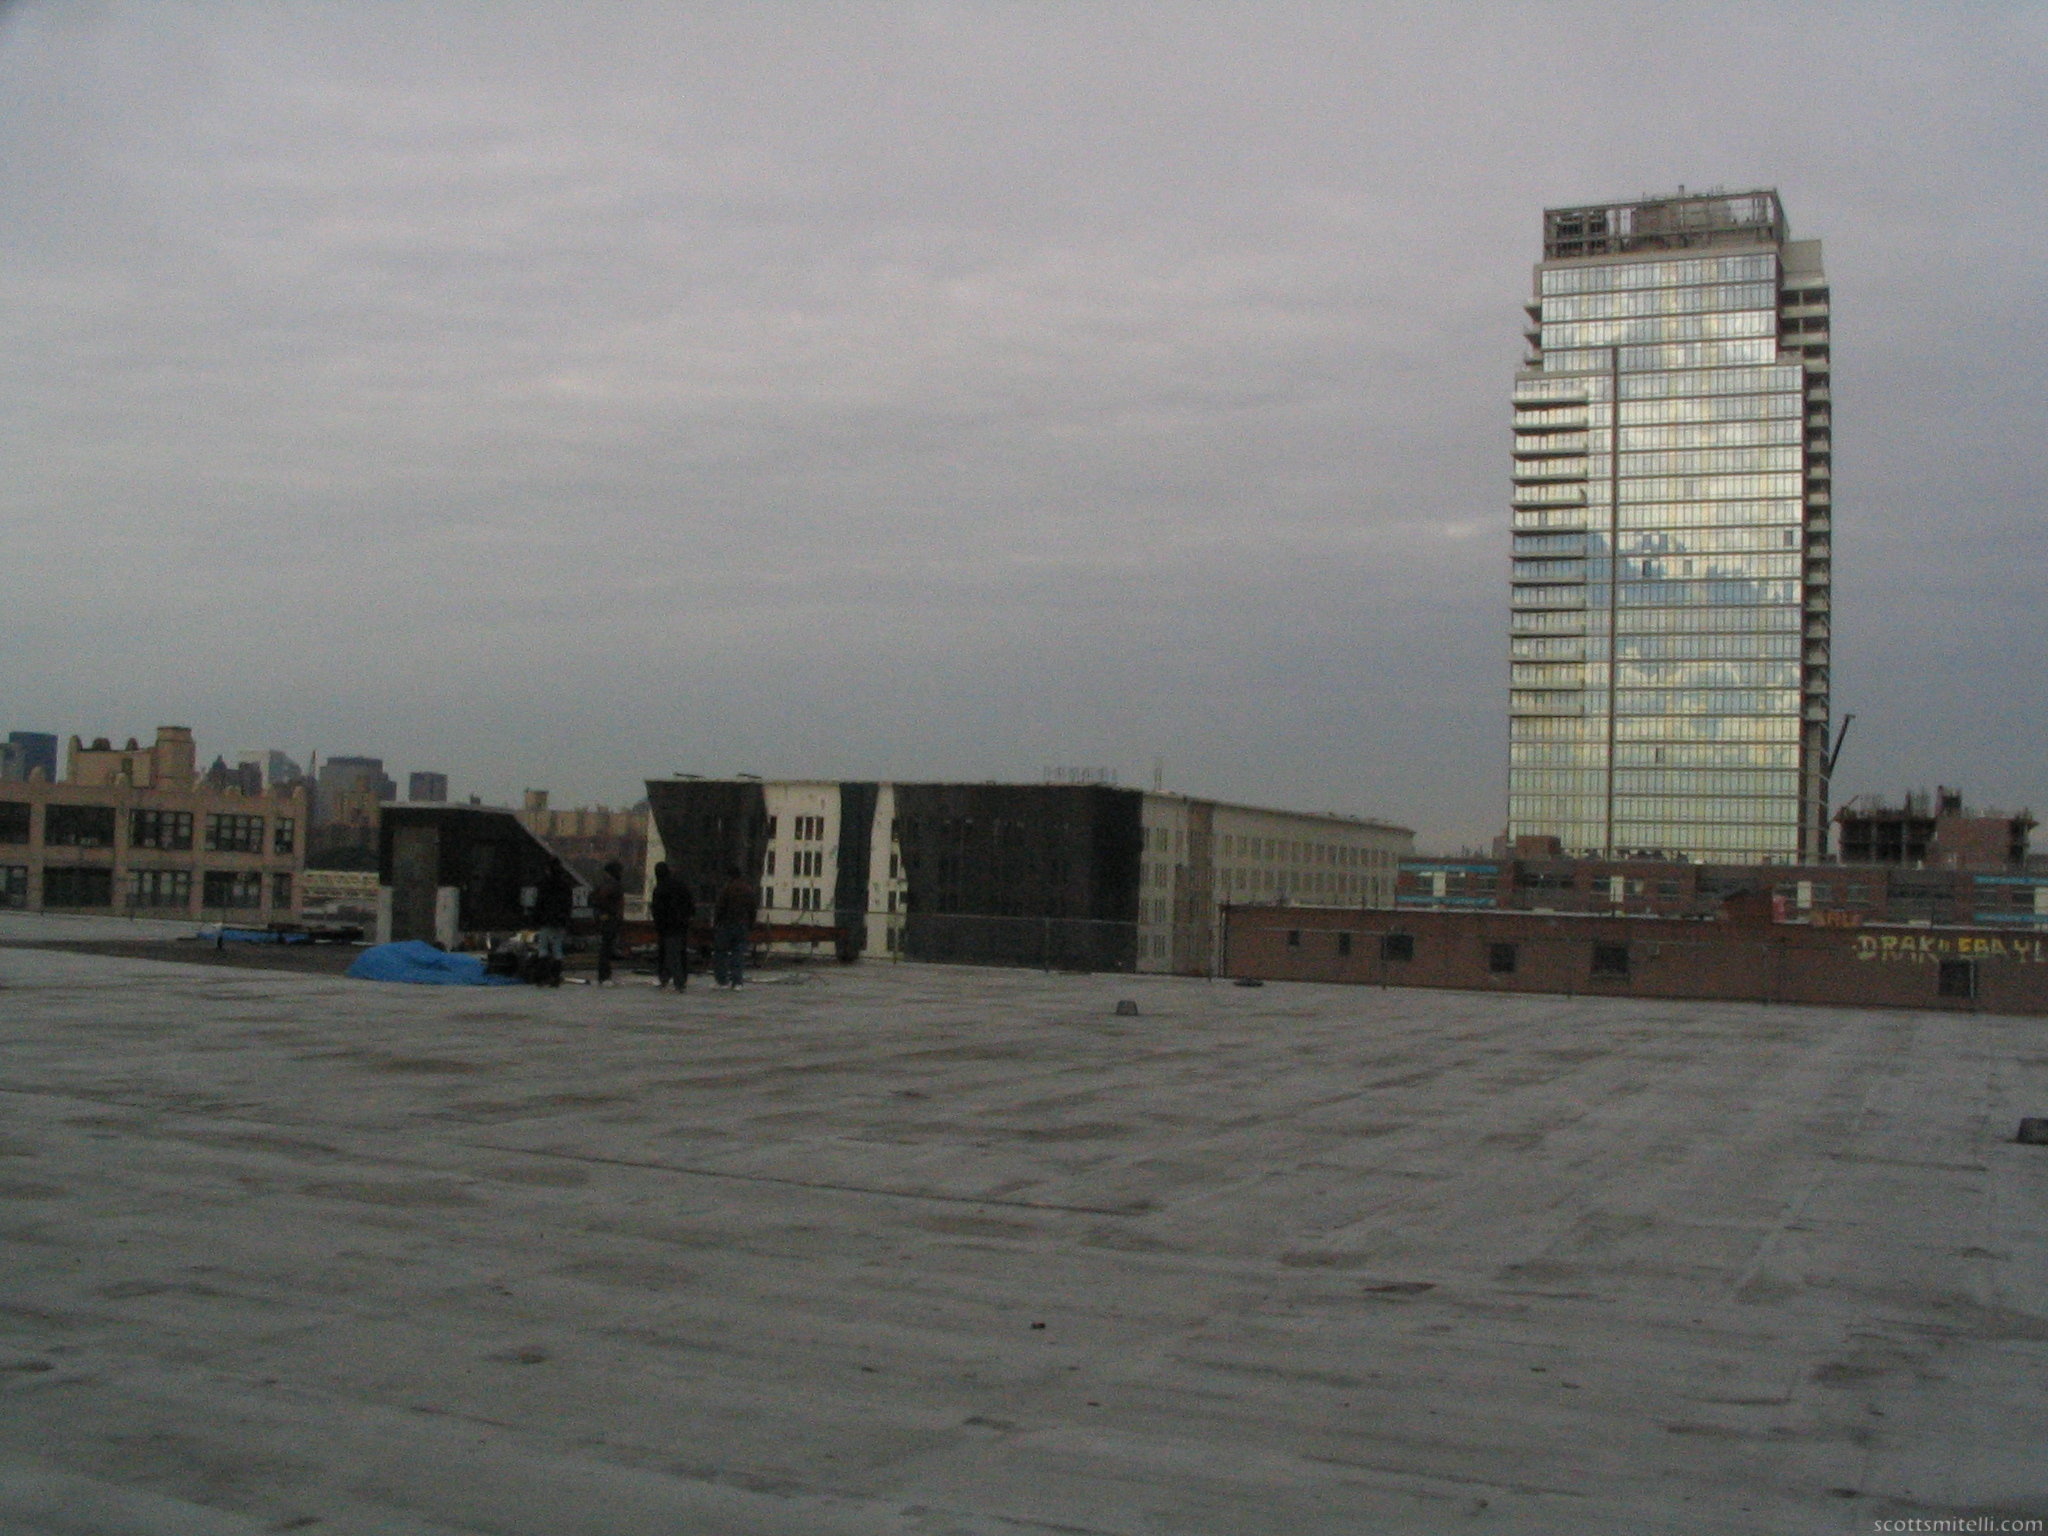 Up On The Roof